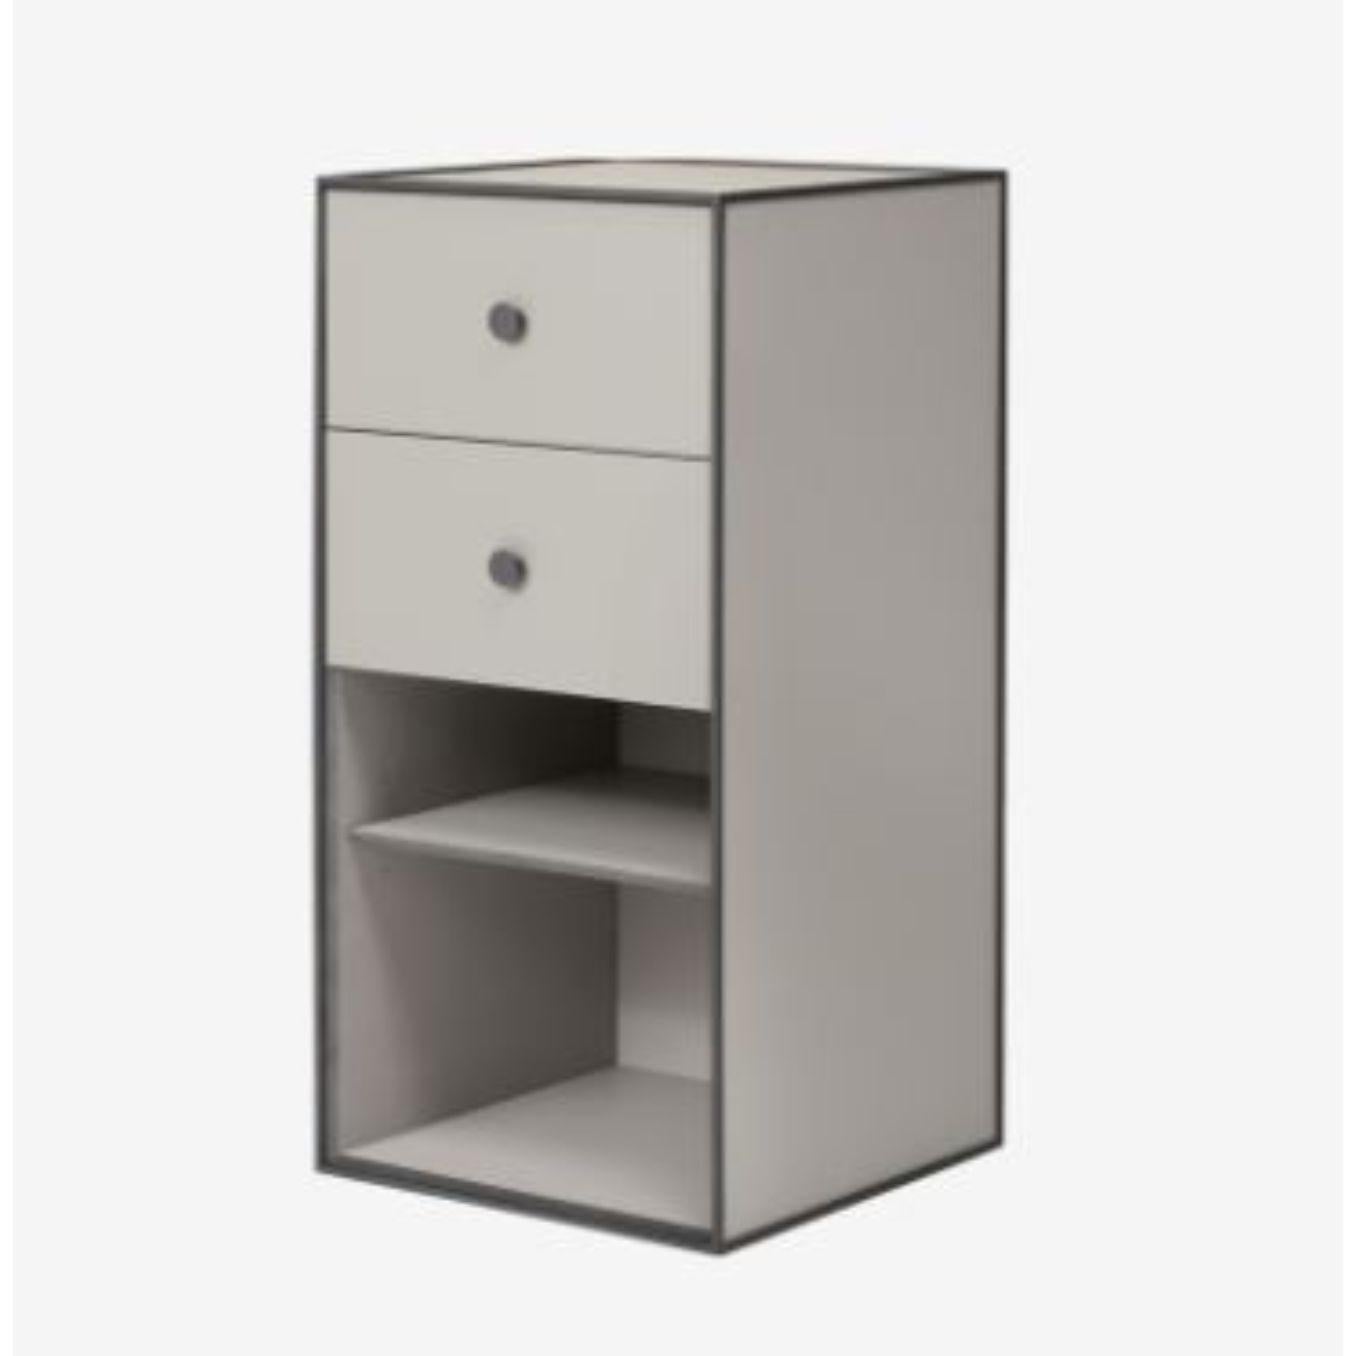 70 sand frame box with shelf / 2 drawers by Lassen
Dimensions: D 35 x W 35 x H 70 cm 
Materials: Finér, Melamin, Melamin, Melamine, Metal, Veneer
Also available in different colors and dimensions.
Weight: 13 Kg


By Lassen is a Danish design